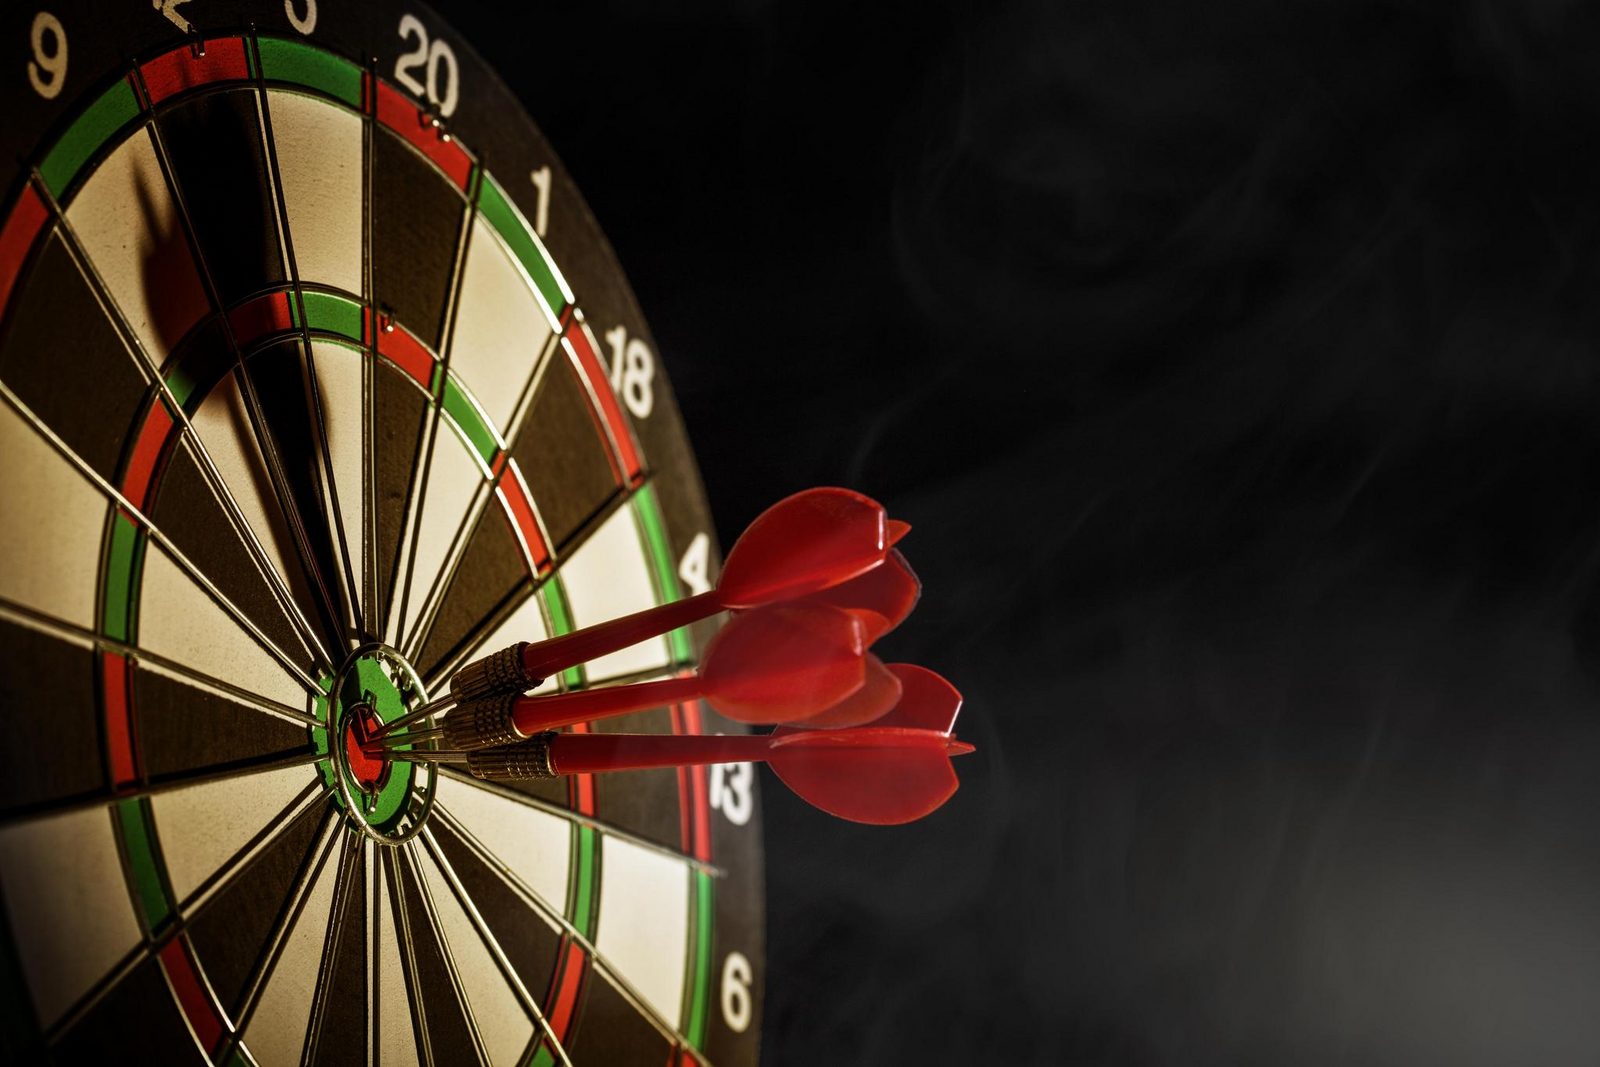 Darts package (27/01 to 03/02)